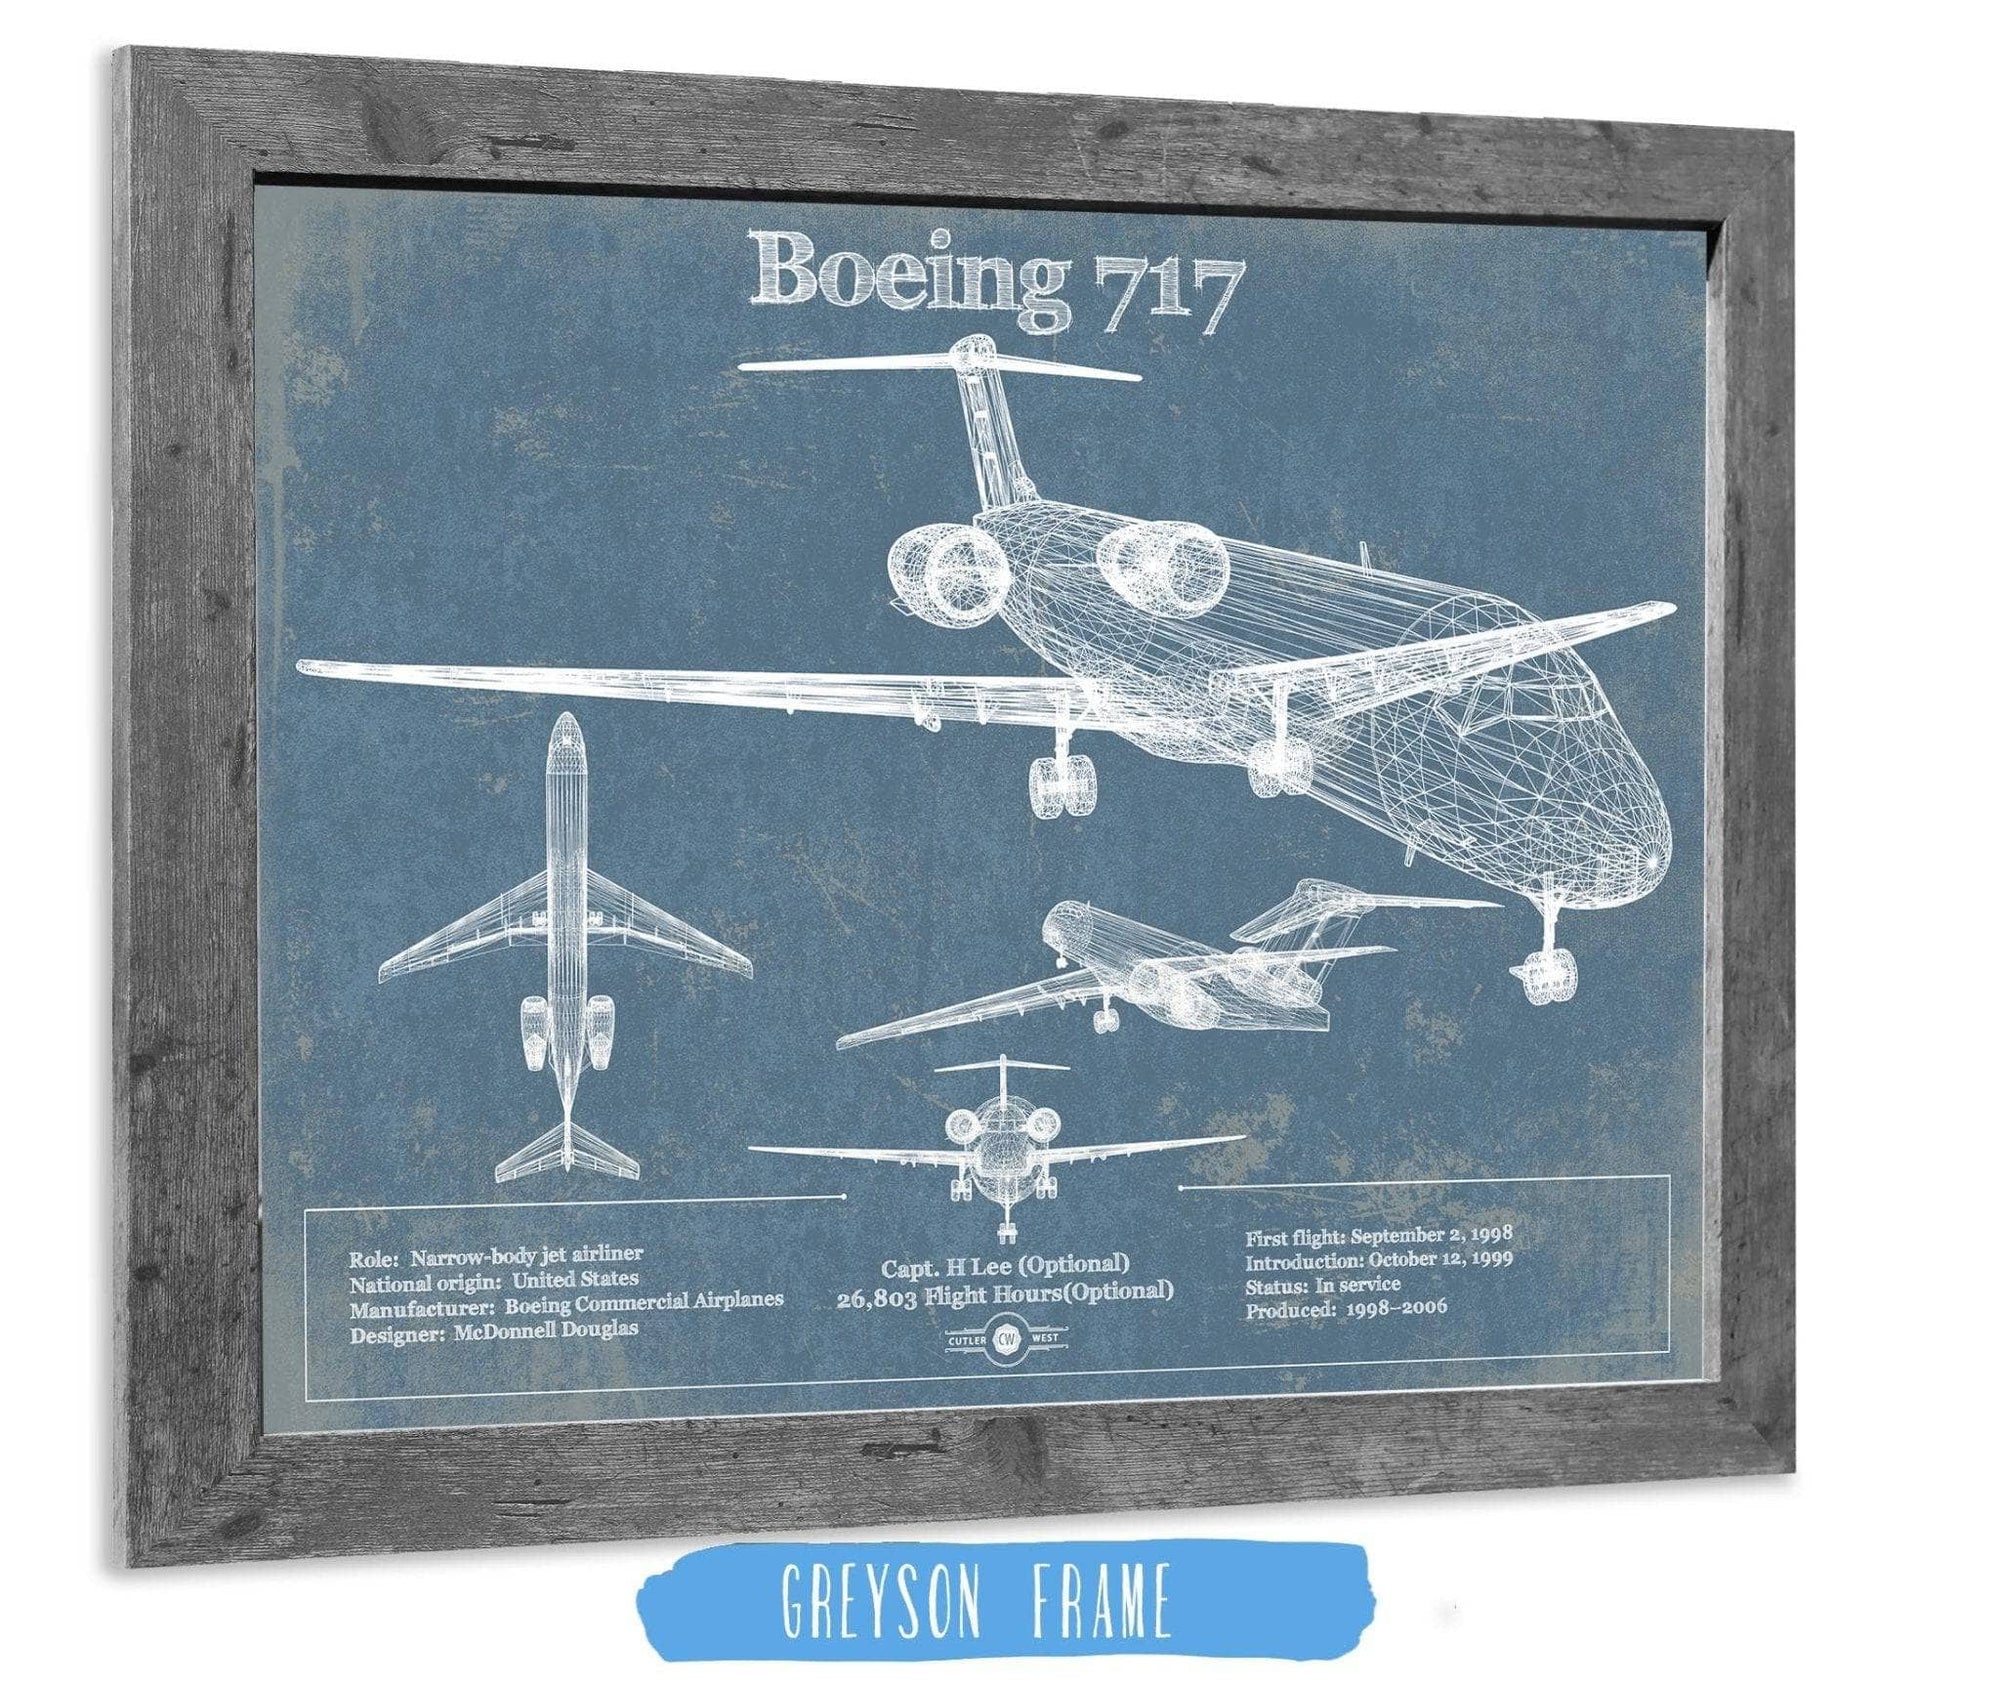 Cutler West Boeing Collection 14" x 11" / Greyson Frame Boeing 717 Vintage Aviation Blueprint Print - Custom Pilot Name Can Be Added 840189113_48480